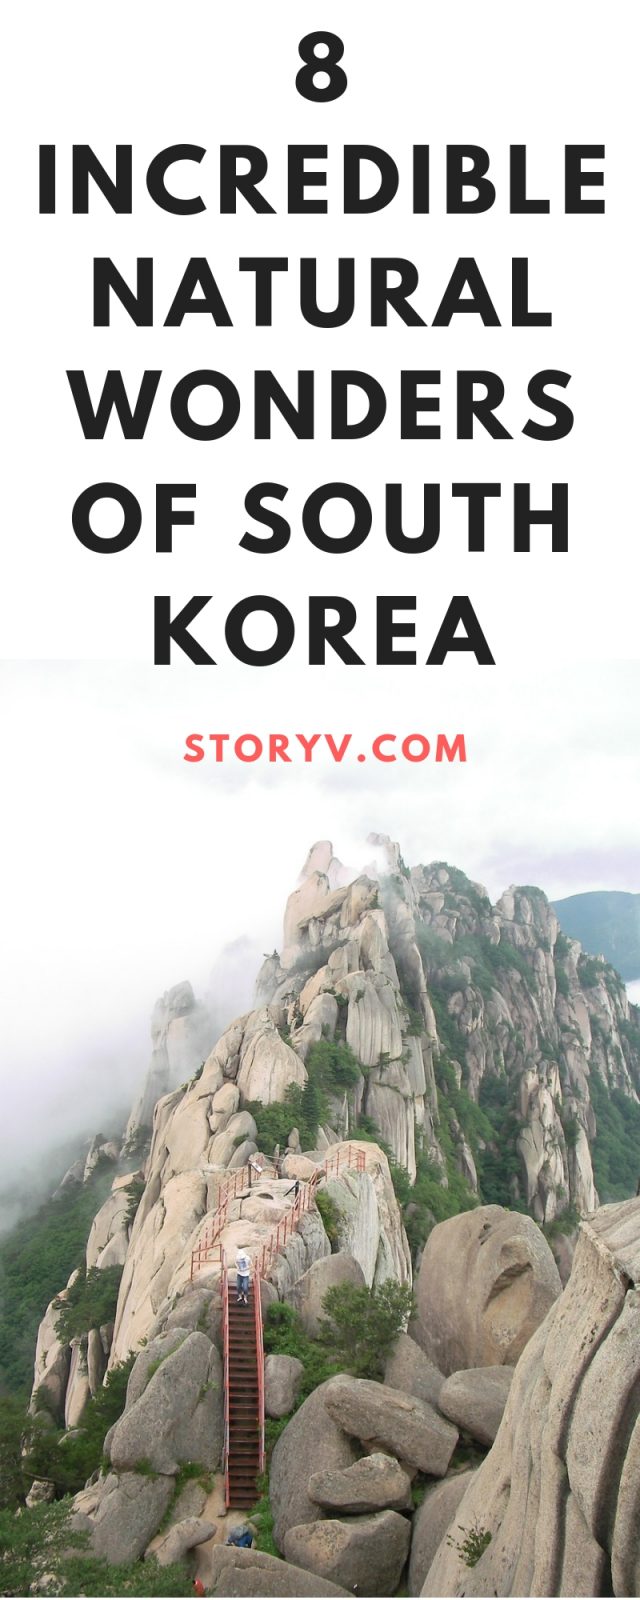 Looking to make the most of your trip to South Korea? These 8 must-see natural wonders of South Korea will surely take your breath away...